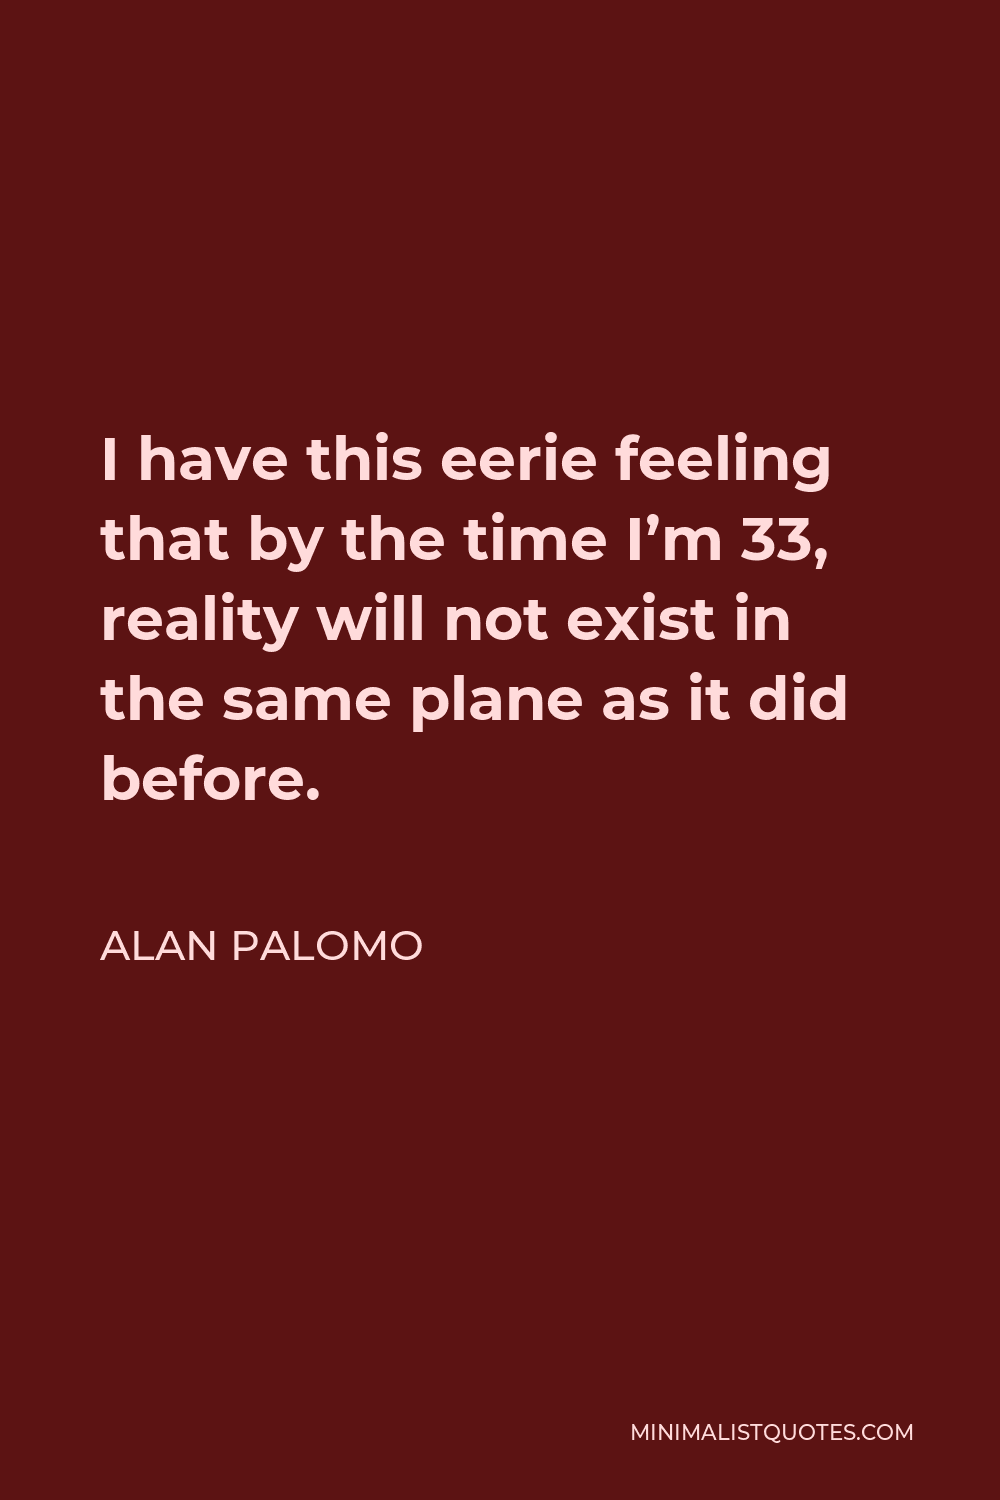 Alan Palomo Quote - I have this eerie feeling that by the time I’m 33, reality will not exist in the same plane as it did before.